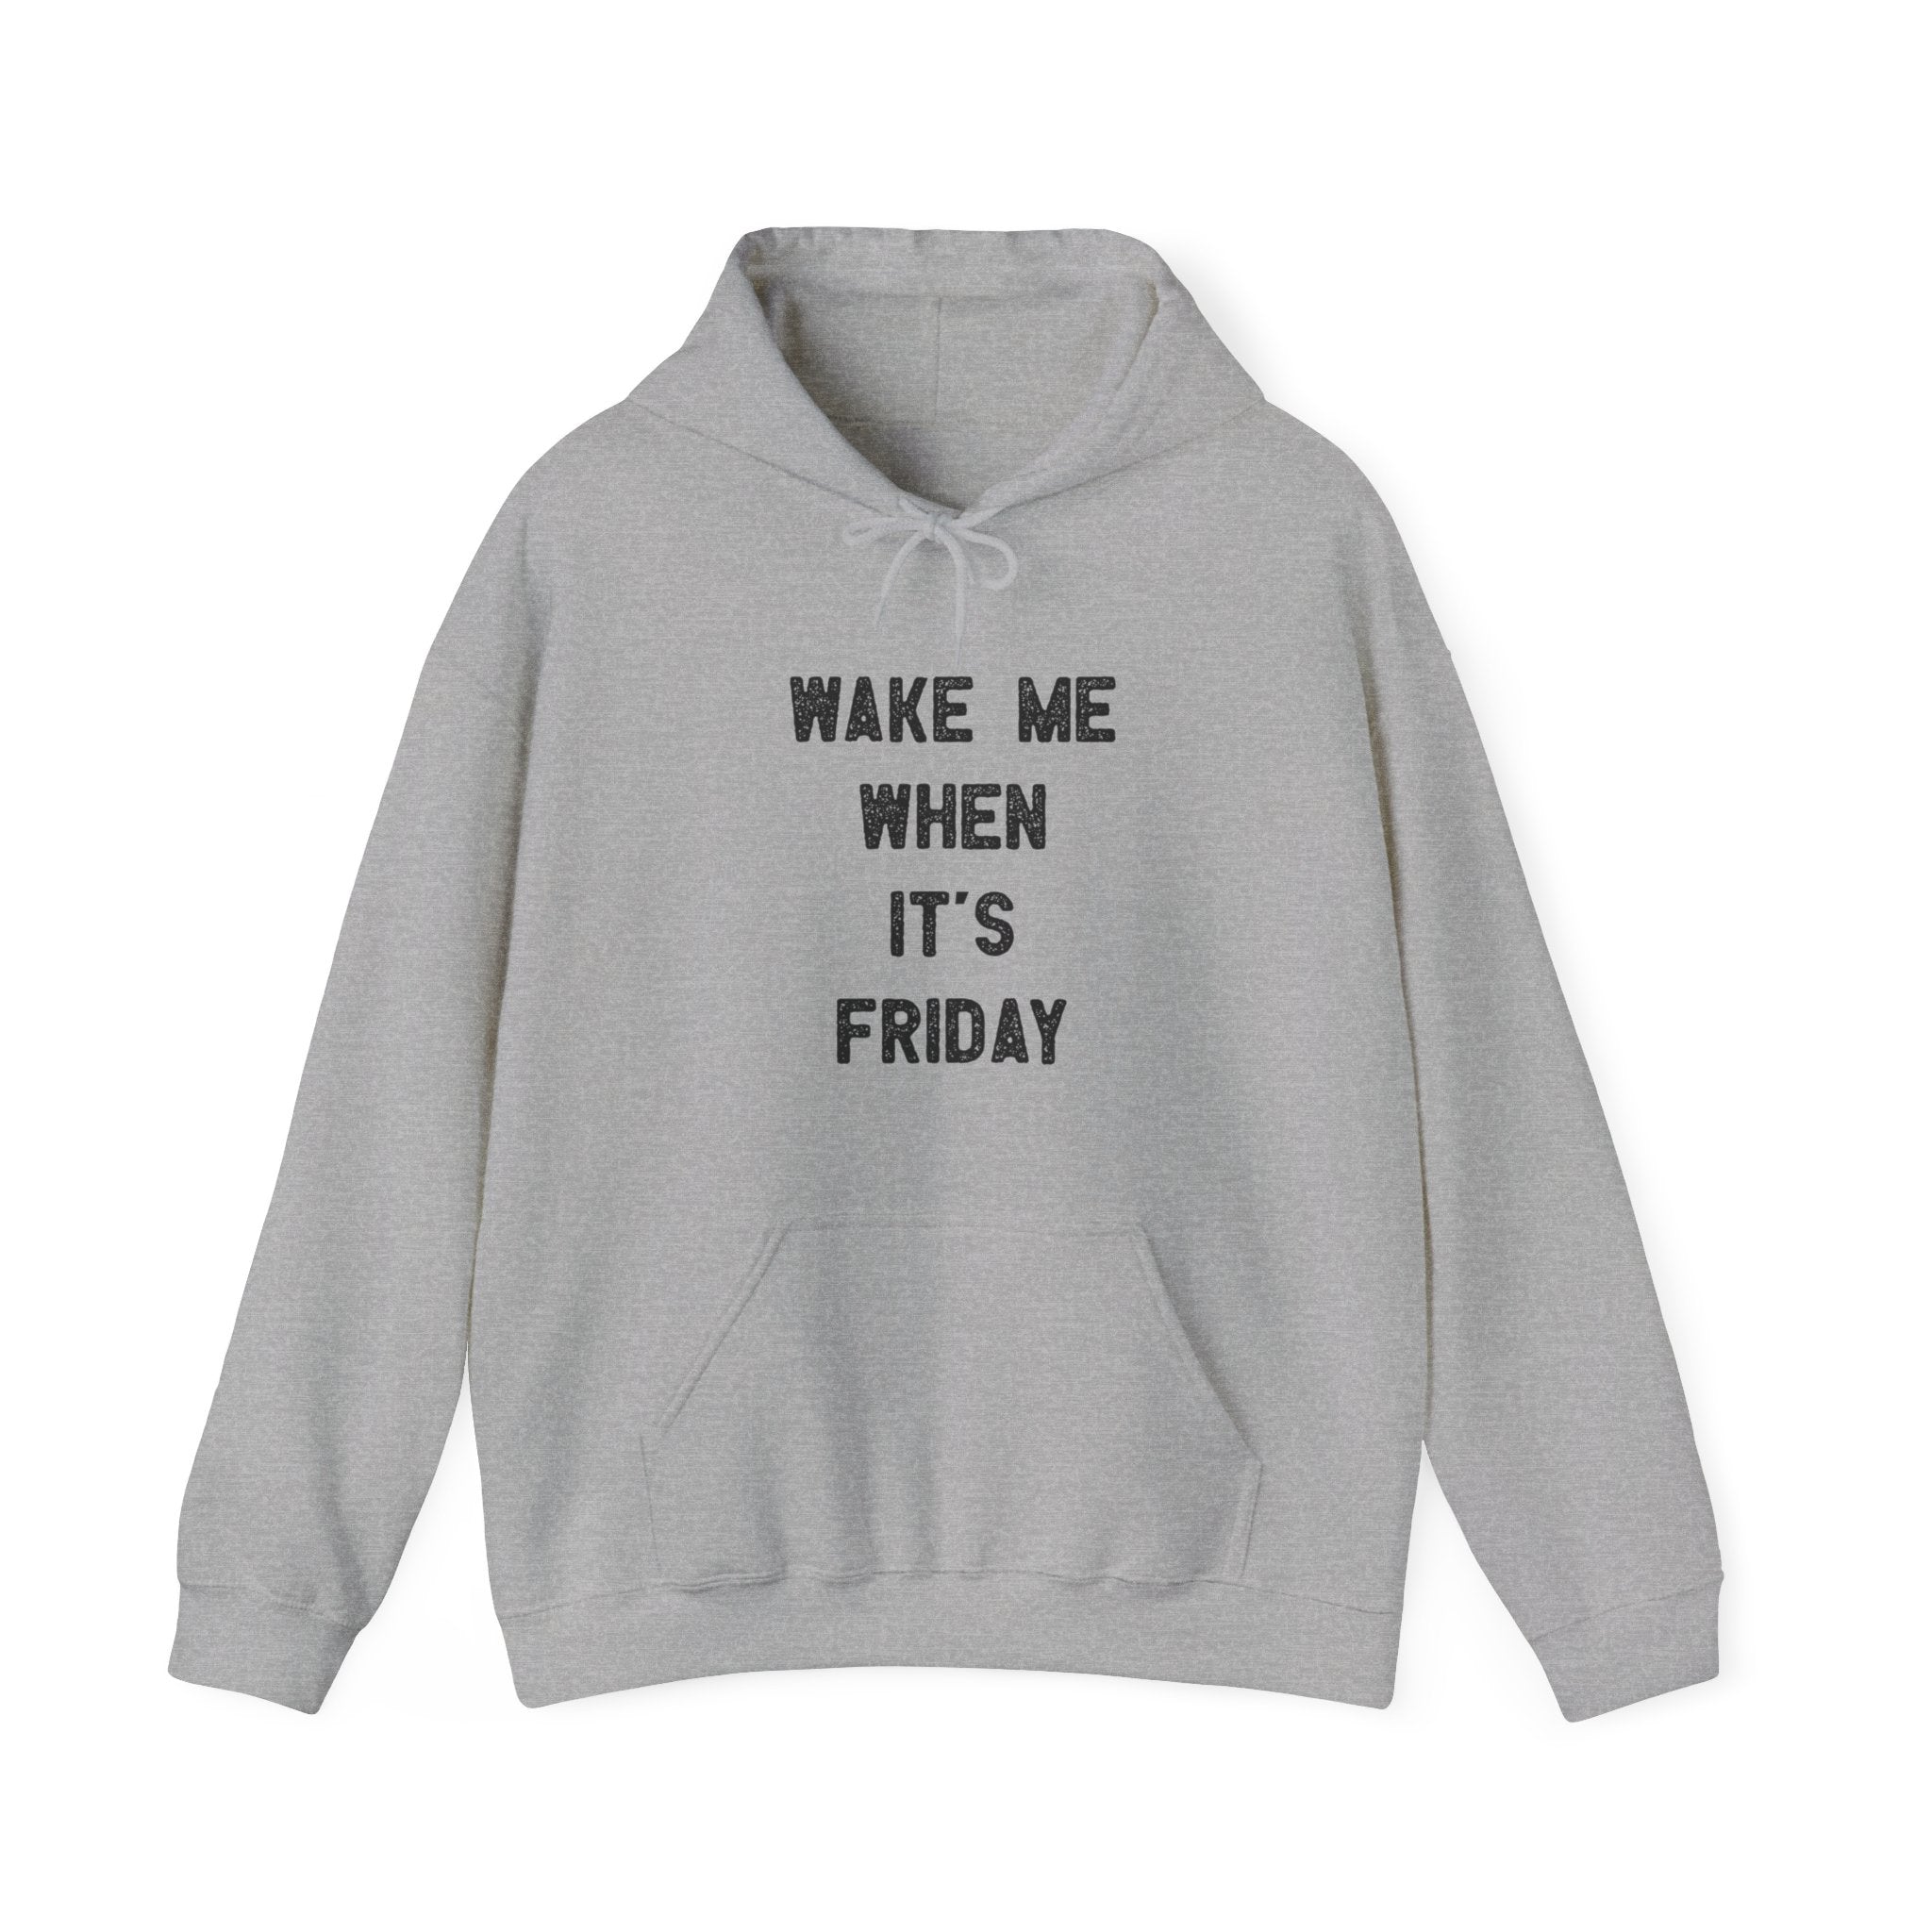 A grey hooded sweatshirt with a front pocket and hood, displaying the text "WAKE ME WHEN IT'S FRIDAY" in black lettering on the front, exudes a stylish statement that captures the weekend vibe perfectly.